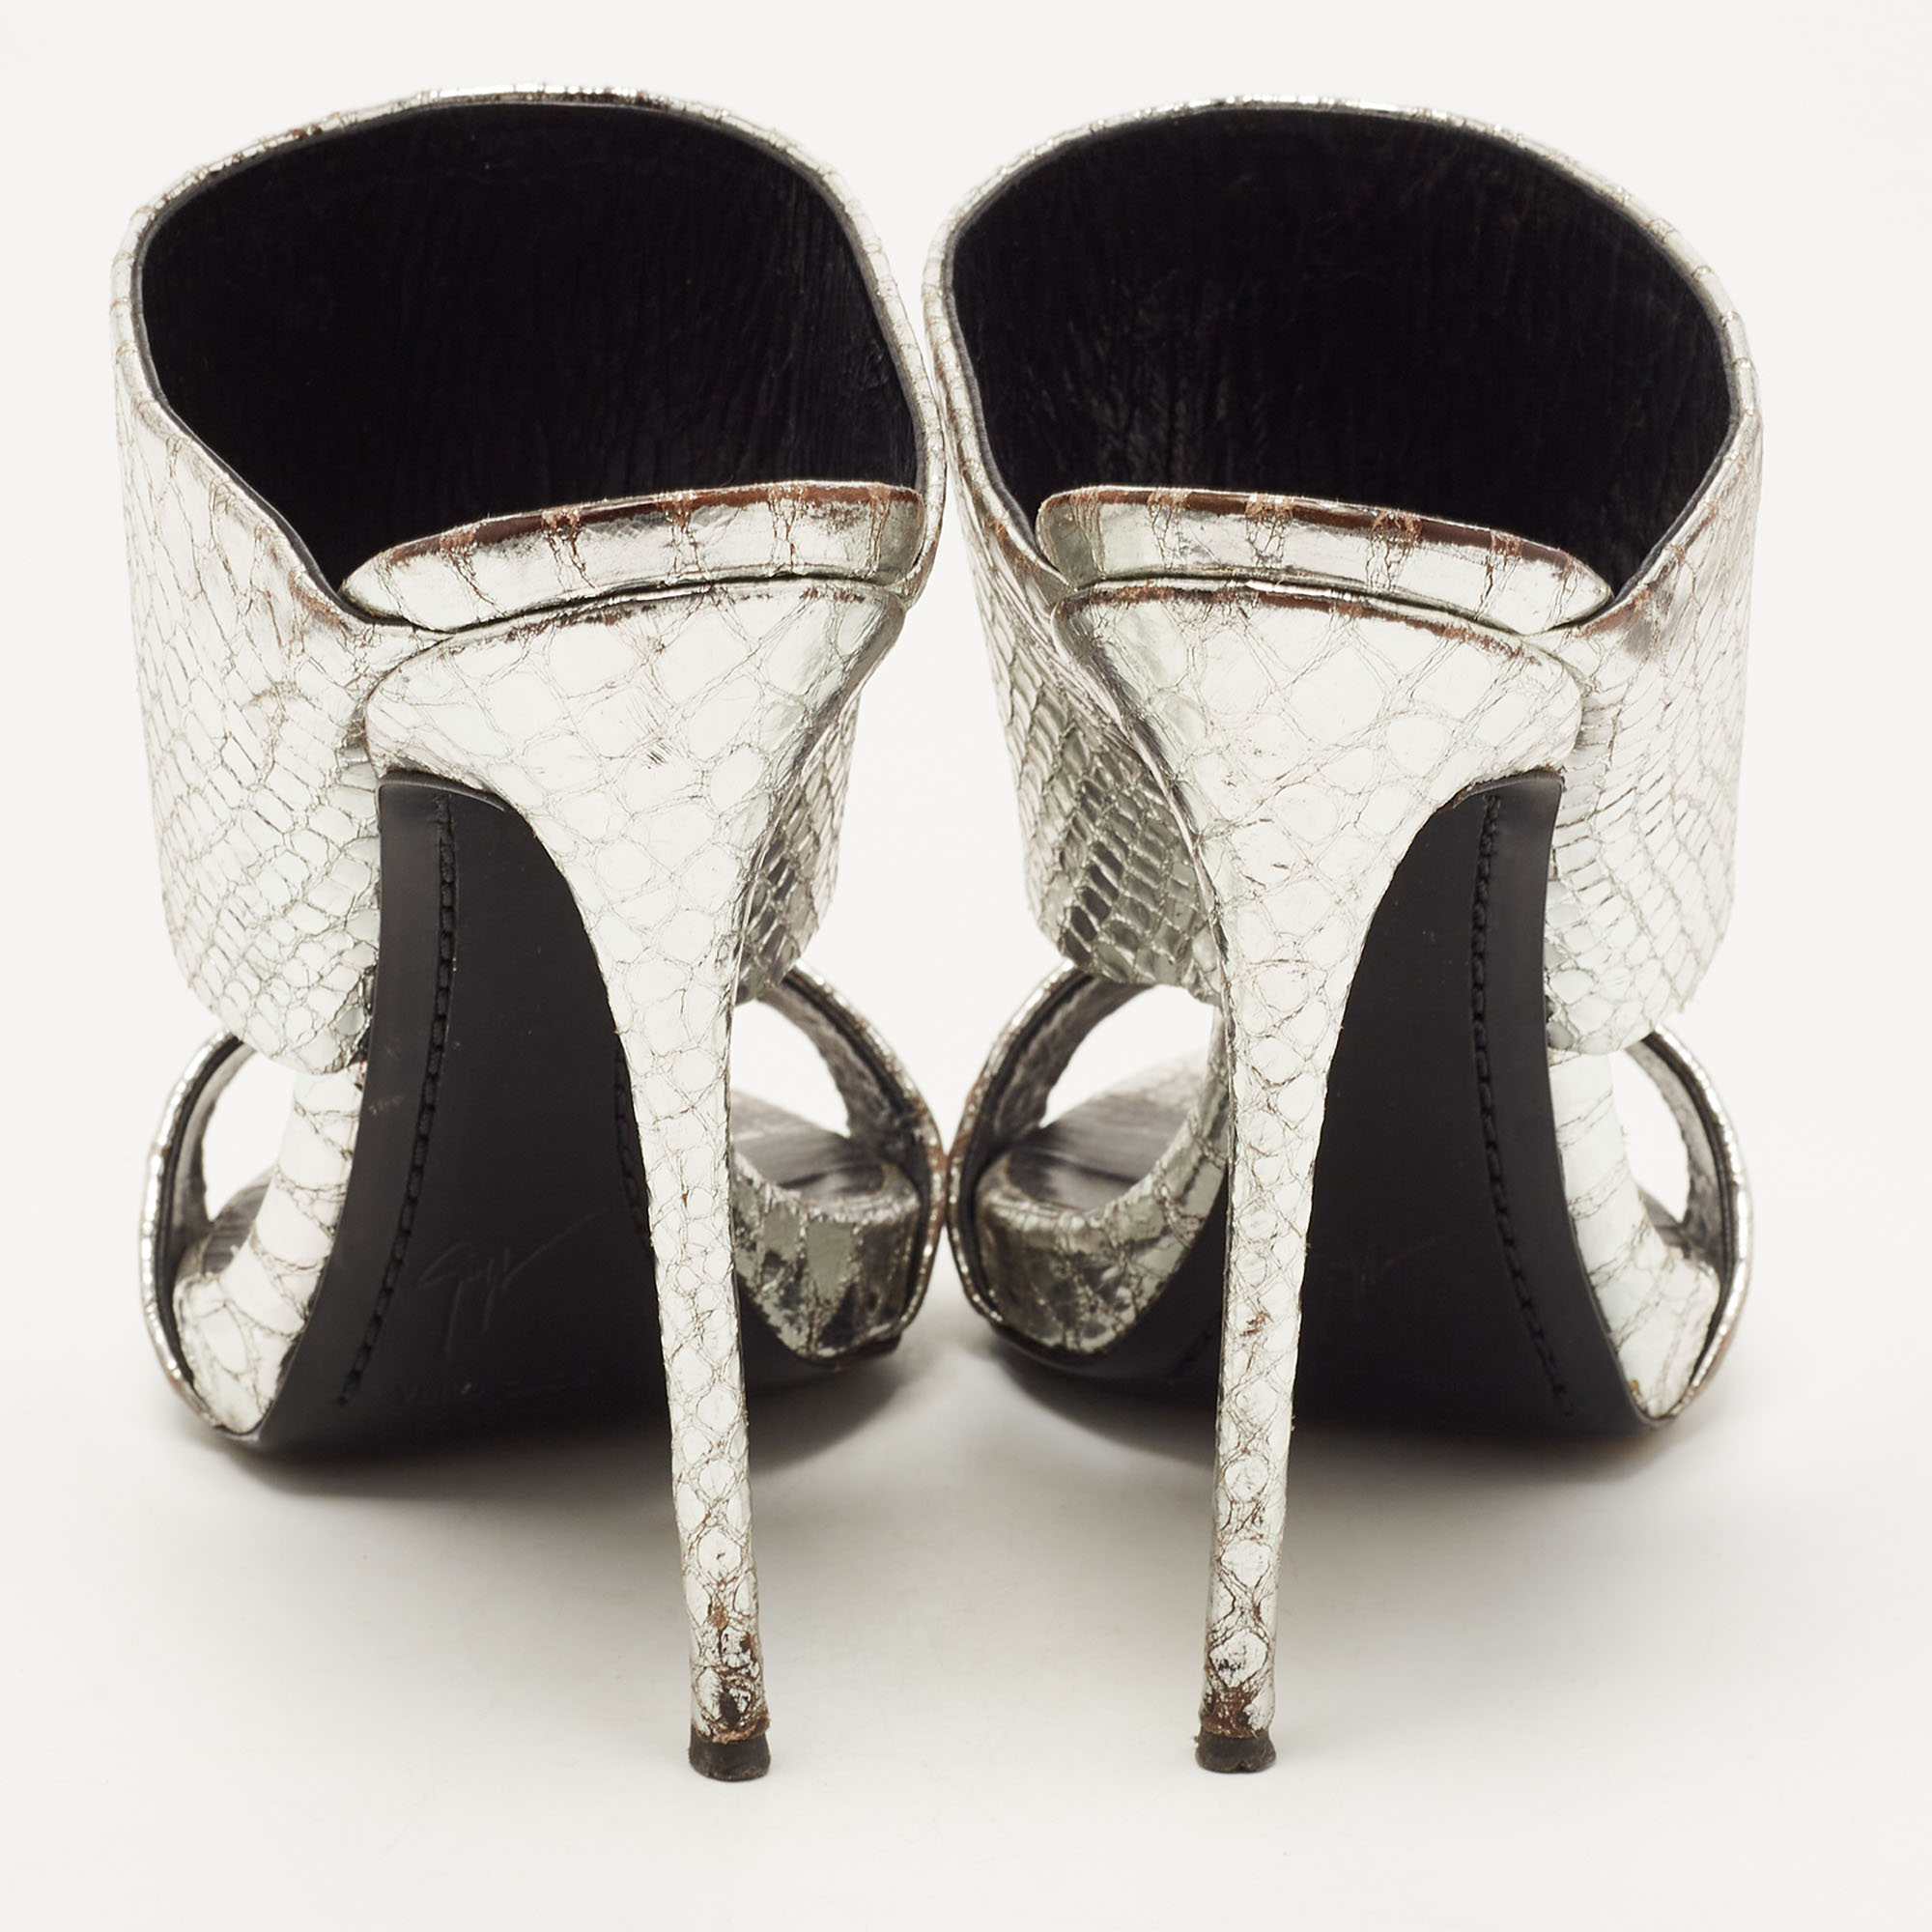 Giuseppe Zanotti Silver Python Embossed Leather Andrea Sandals Size 38.5